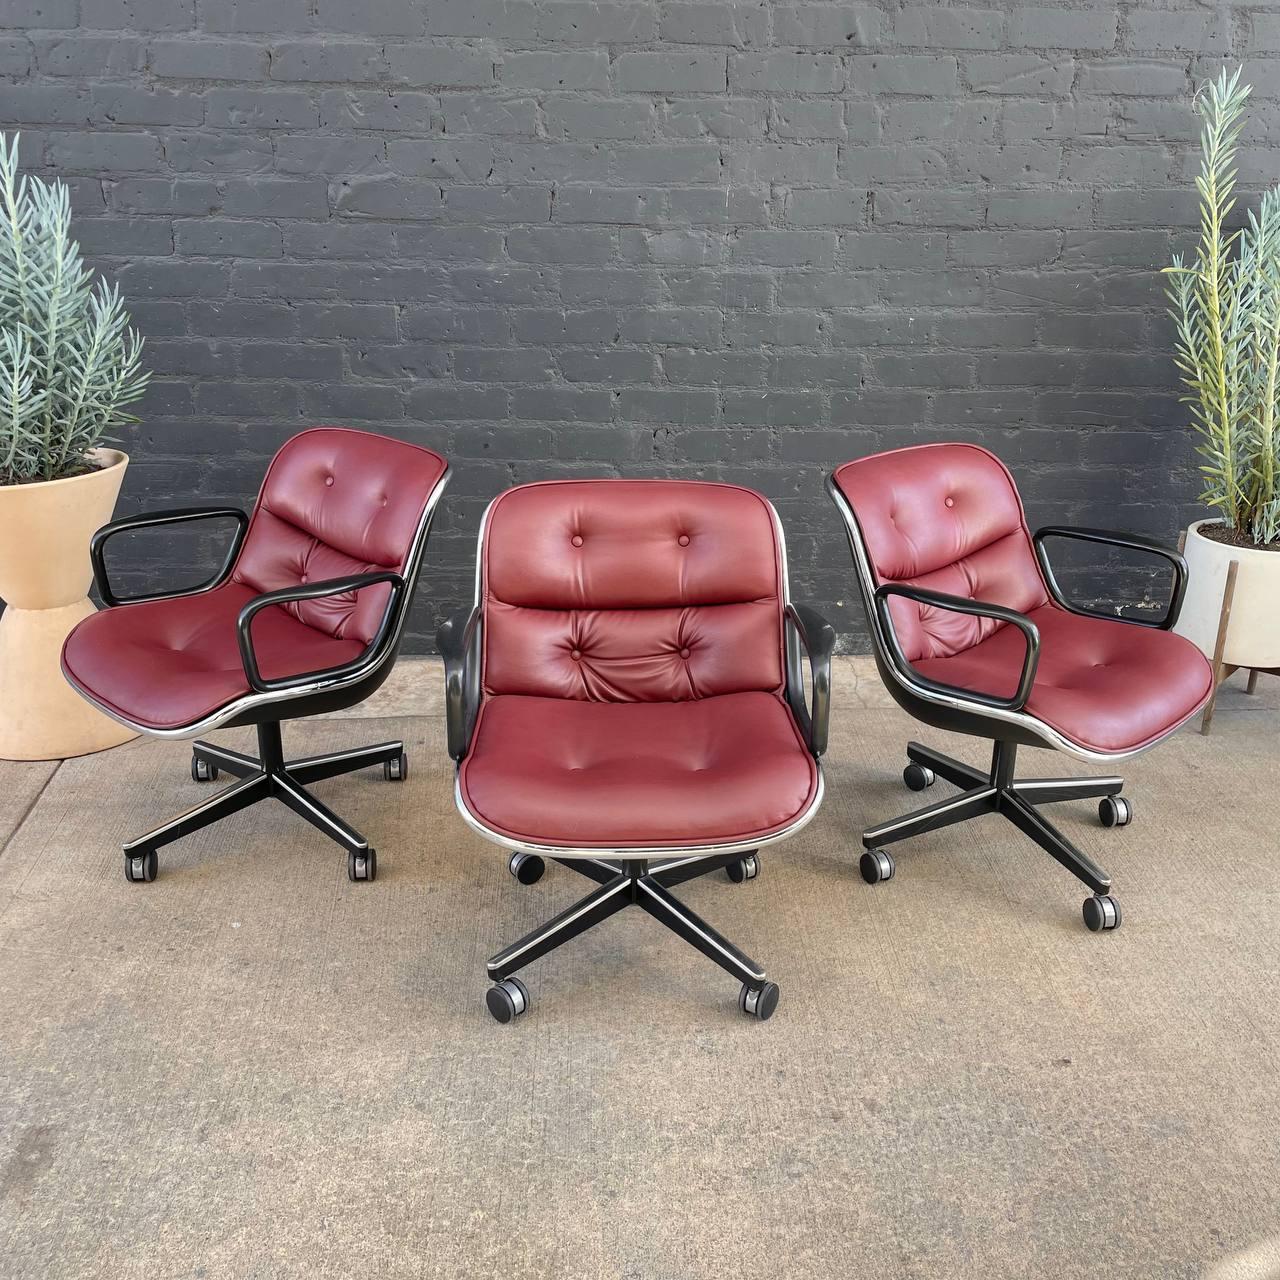 American Set of 4 Charles Pollock for Knoll Leather Executive Desk Chair’s